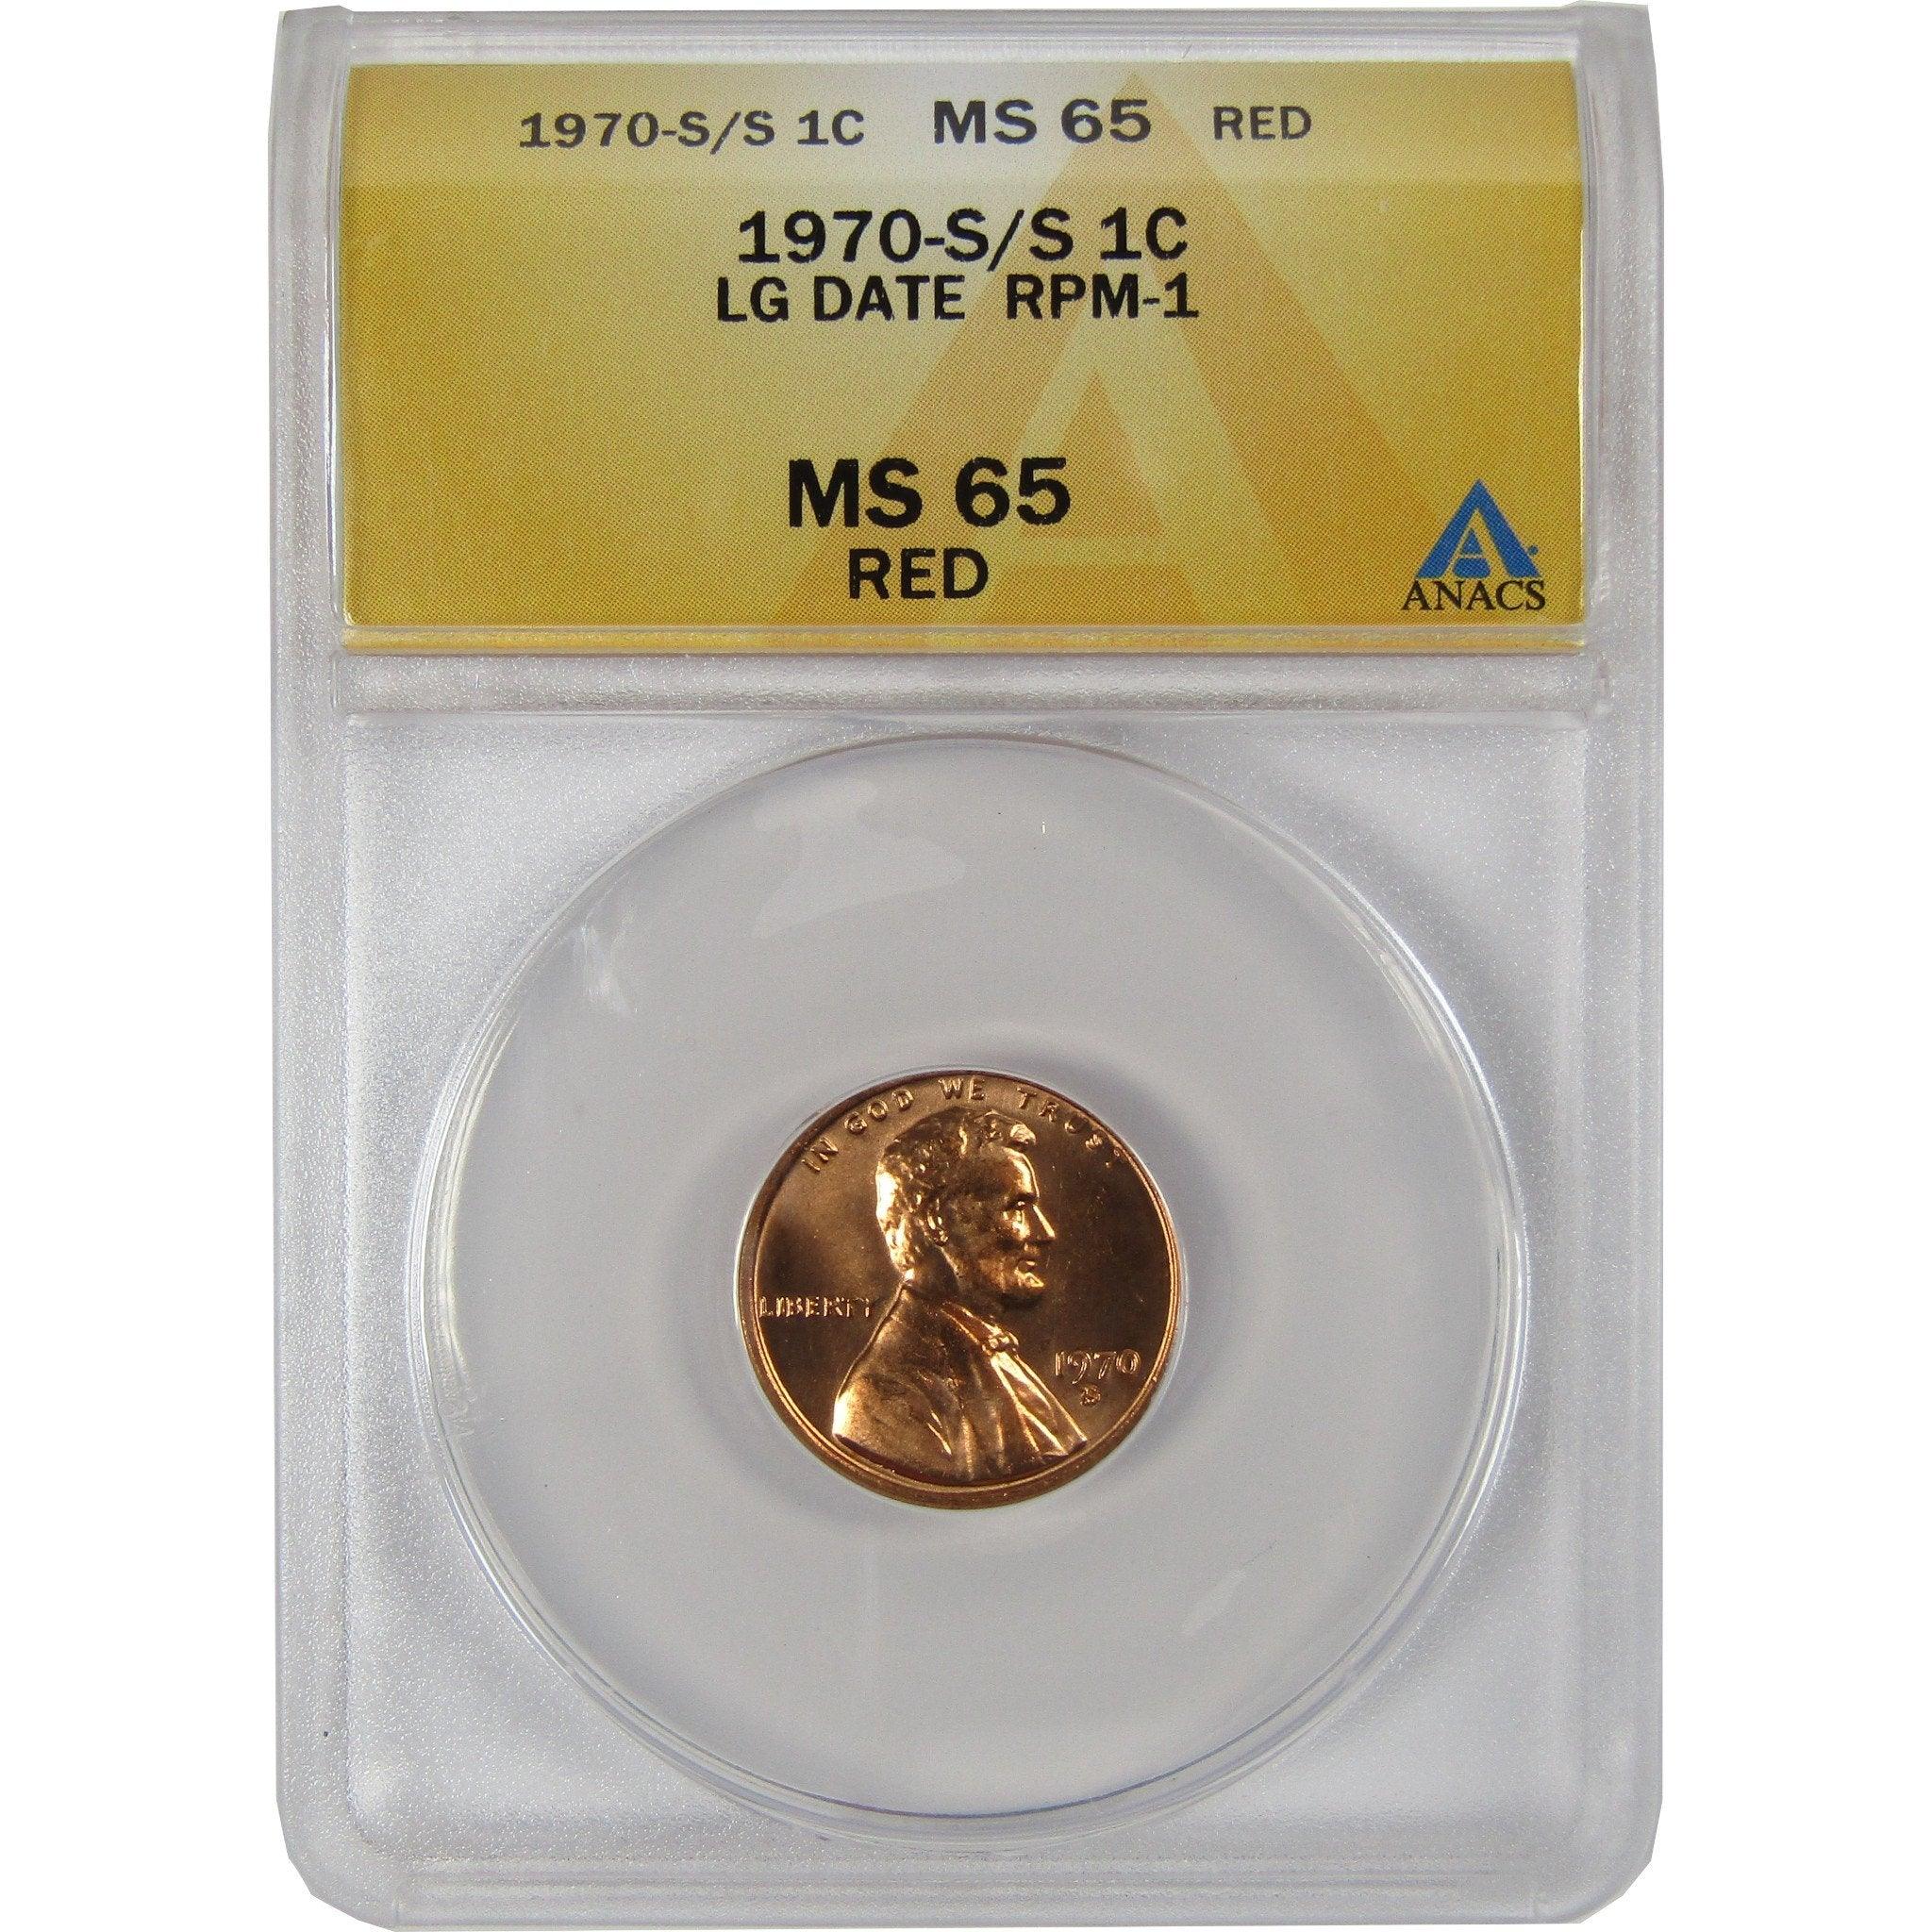 1970 S/S Lg Date Low 7 Lincoln Memorial Cent MS 65 ANACS SKU:CPC1081